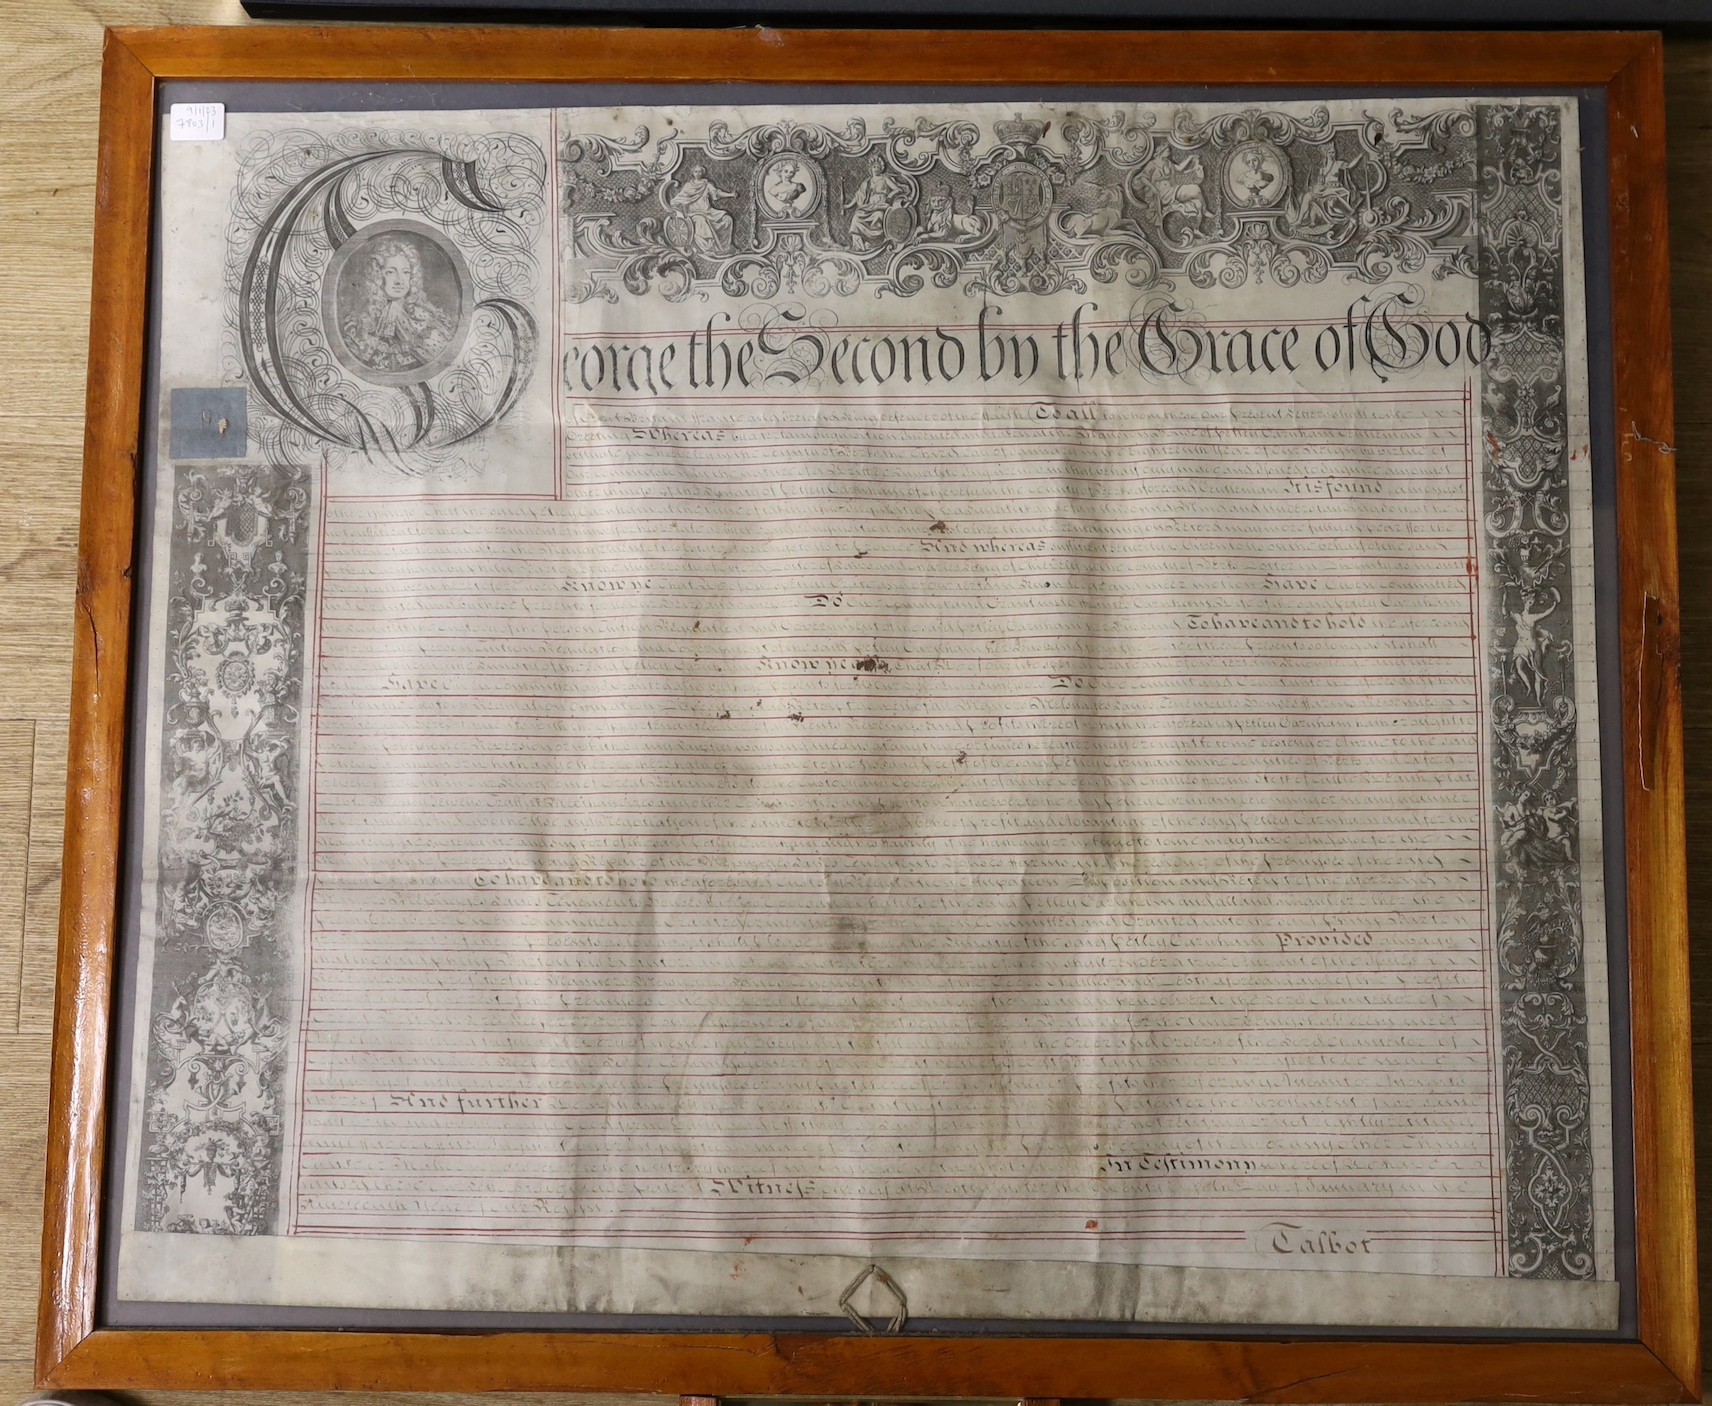 A George II Grant by letters patent of the estate of Petley Garnham of Chieveley in Berkshire, a lunatic; 28 Jan 1746, with wax great seal, 82cms wide x 68cms high